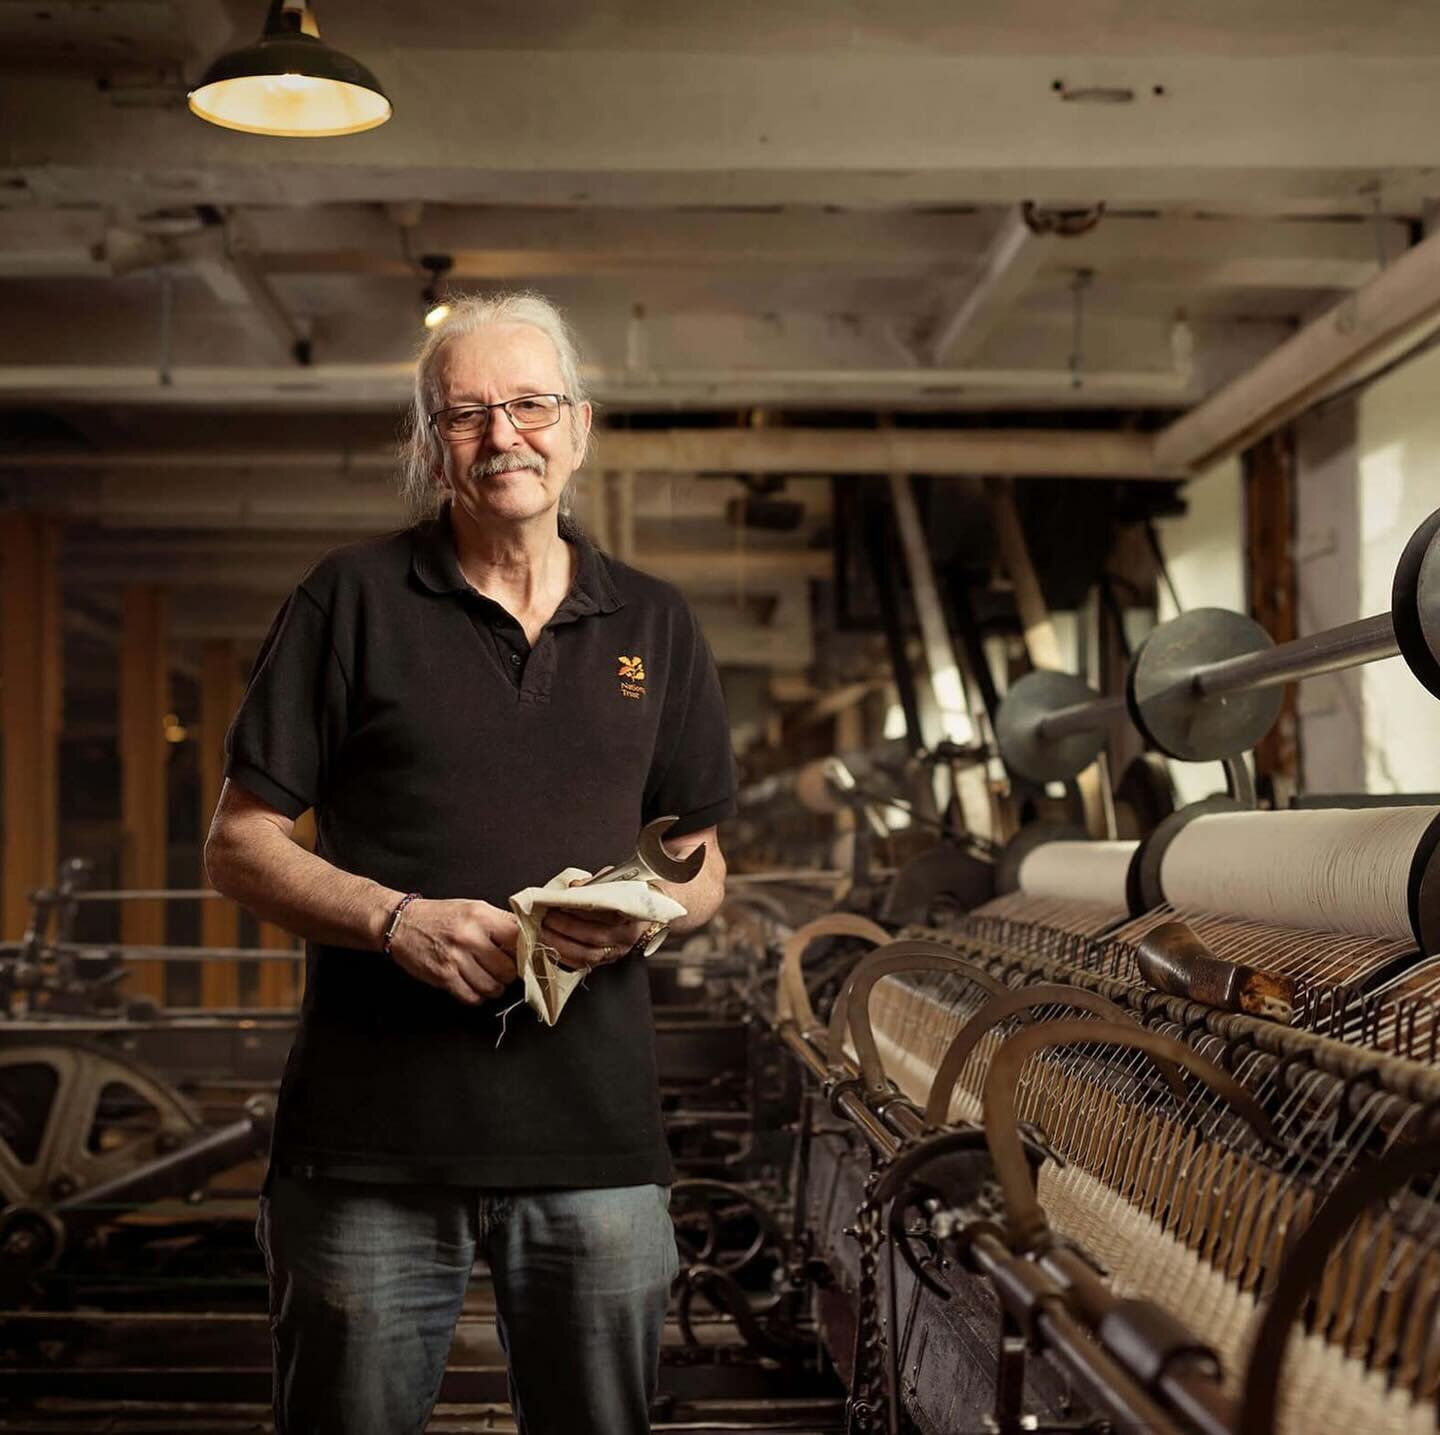 Portraits of Rex who is one of the National Trust conservation team at Quarry Bank Mill. The images were taken to promote the Channel 4 documentary &lsquo;Cleaning Britain&rsquo;s Greatest Treasures&rsquo;. It features the dedicated cleaners and main